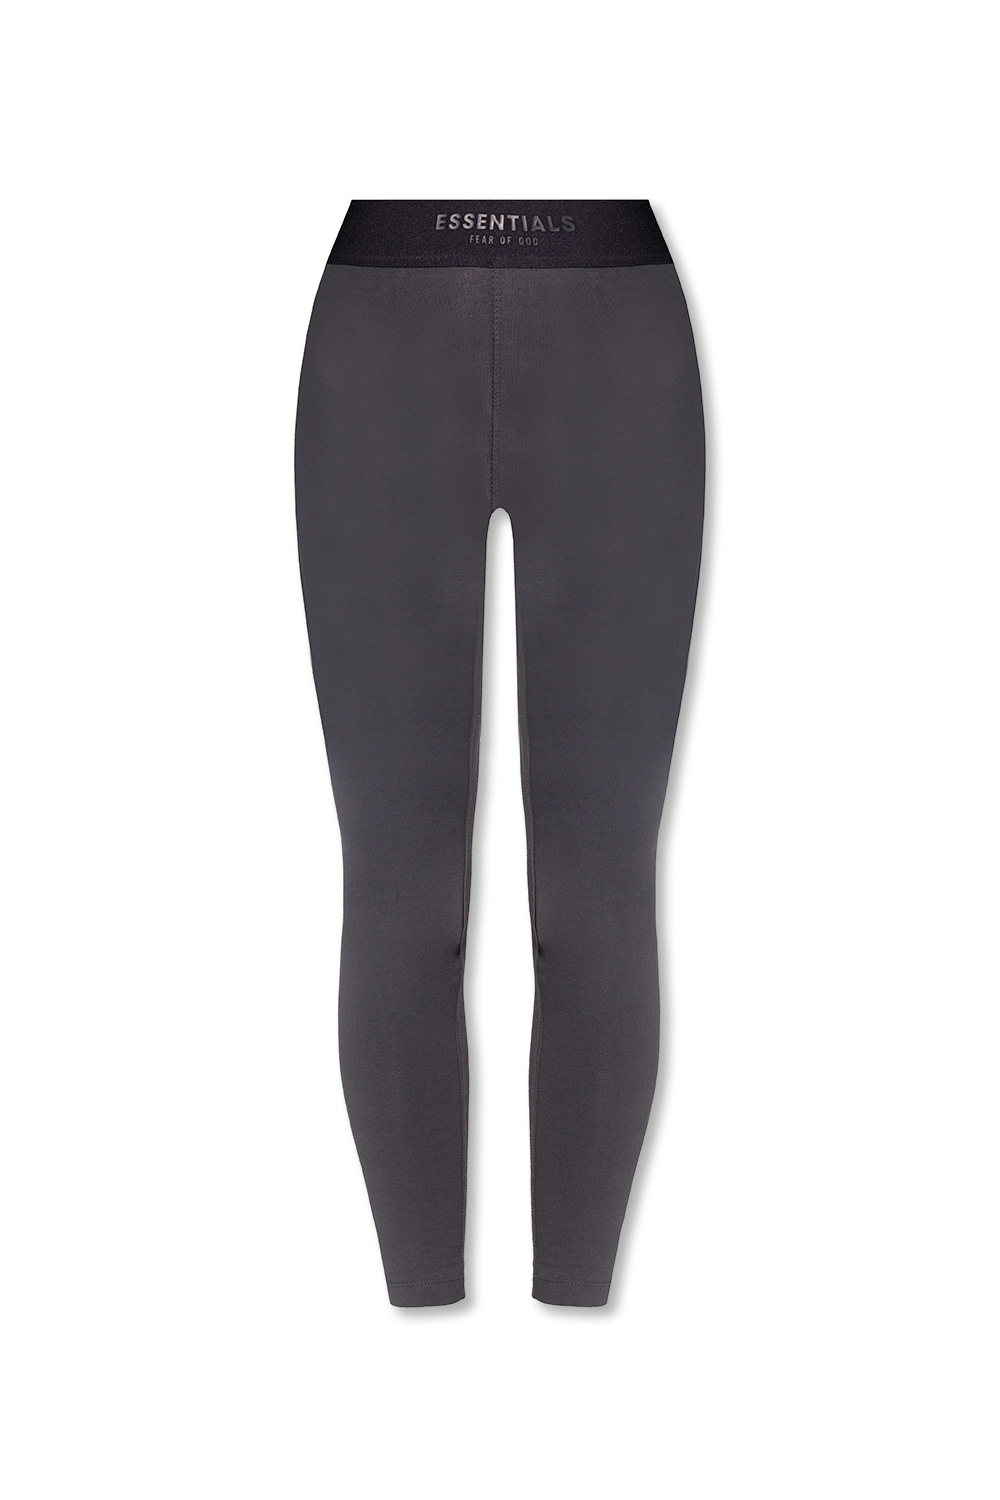 Missguided Maternity leggings with waistband in black